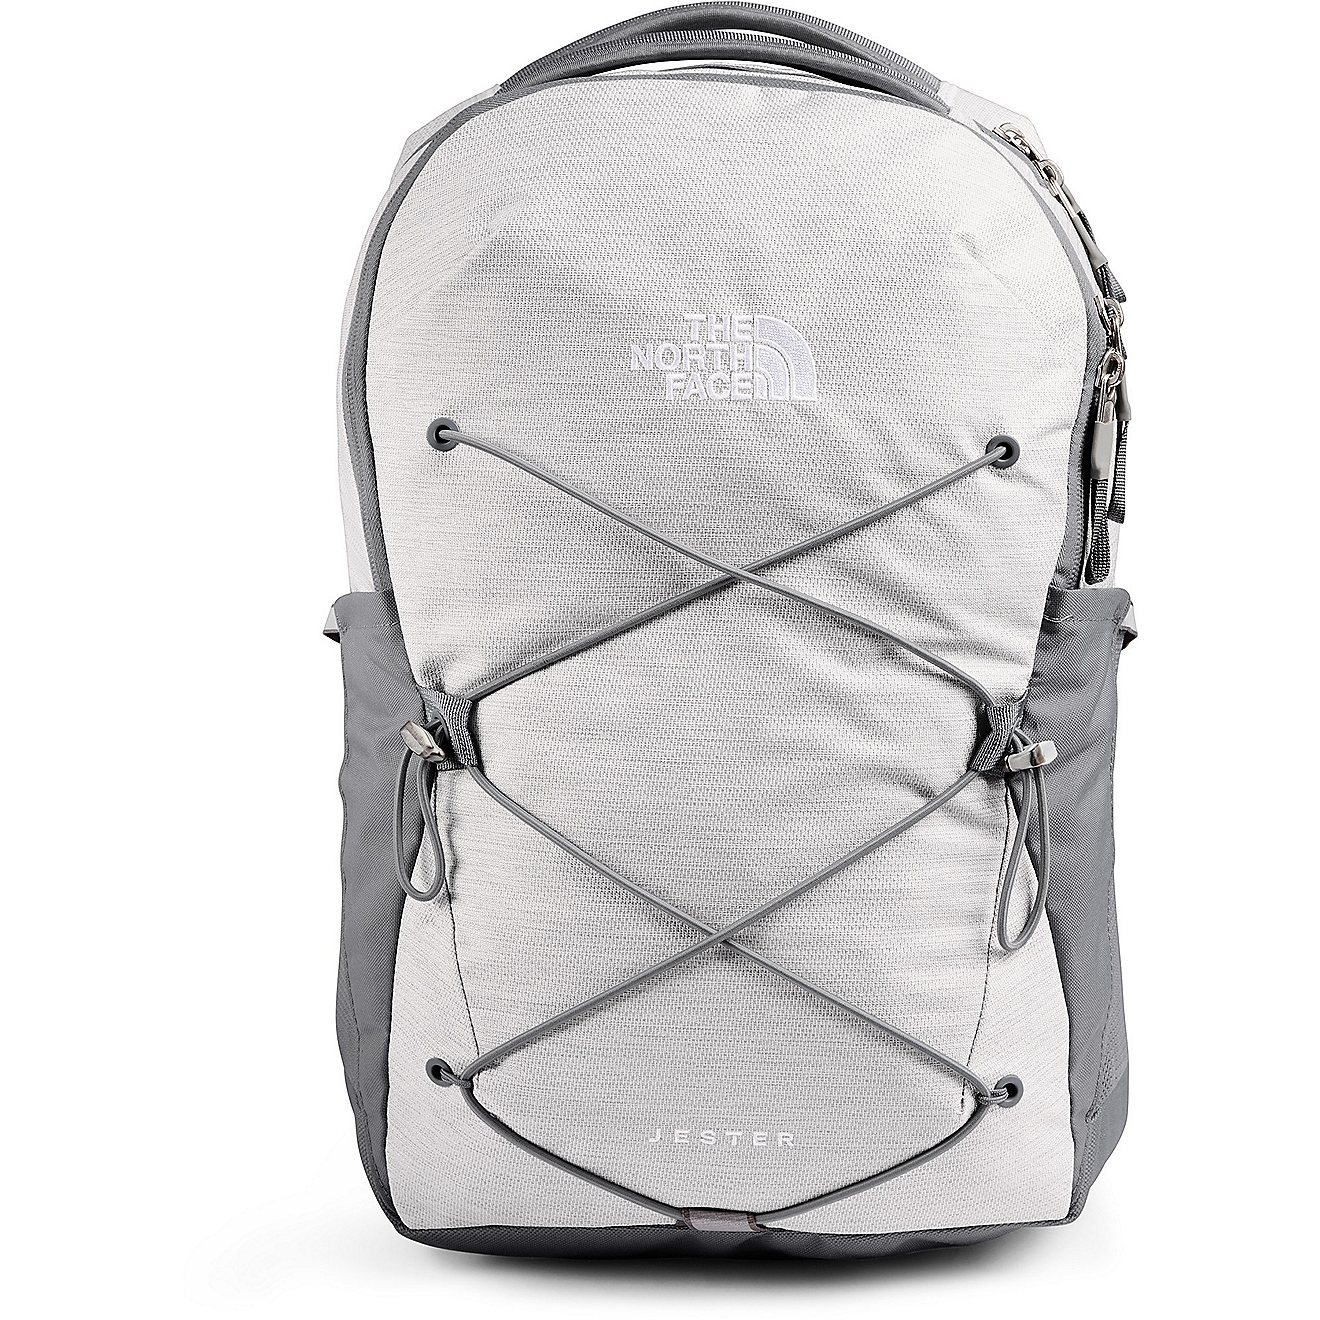 The North Face Women's Jester Backpack                                                                                           - view number 1